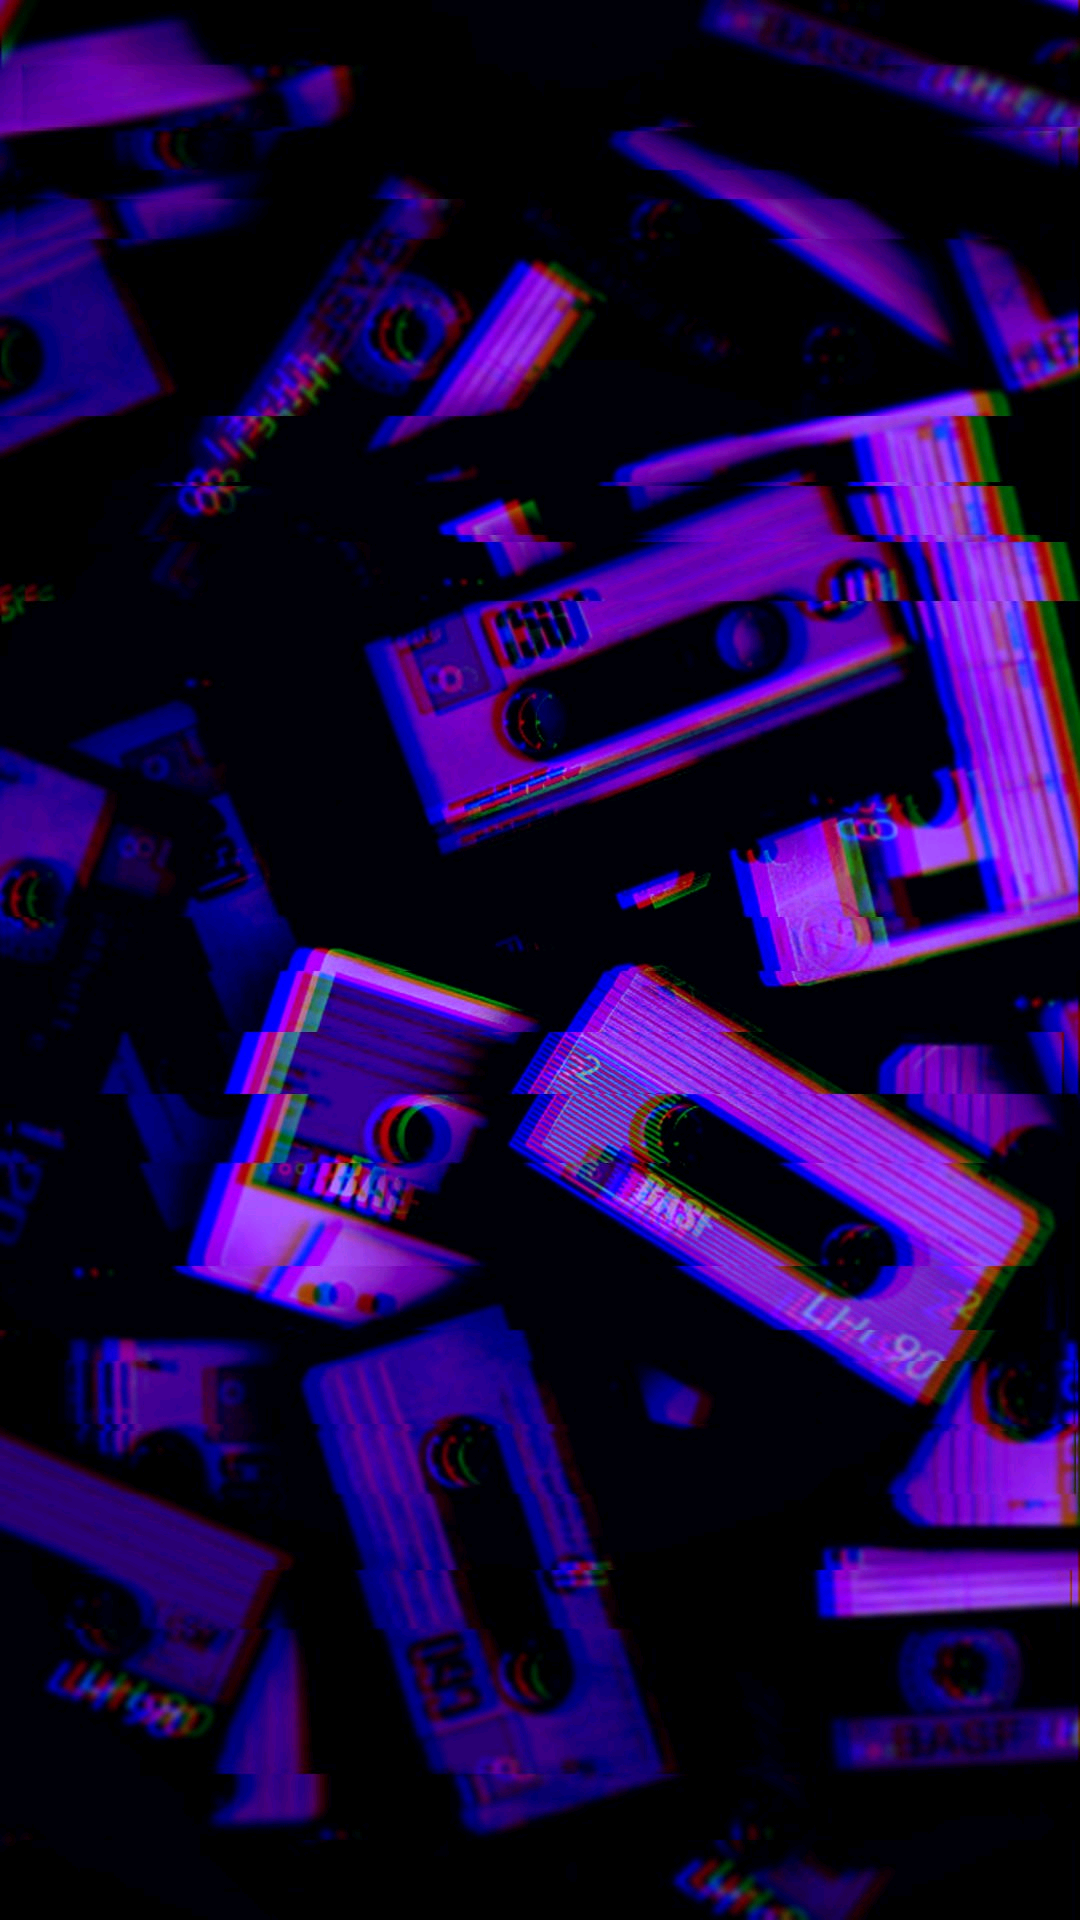 In Cyberscape City we listen to music on cassette tapes